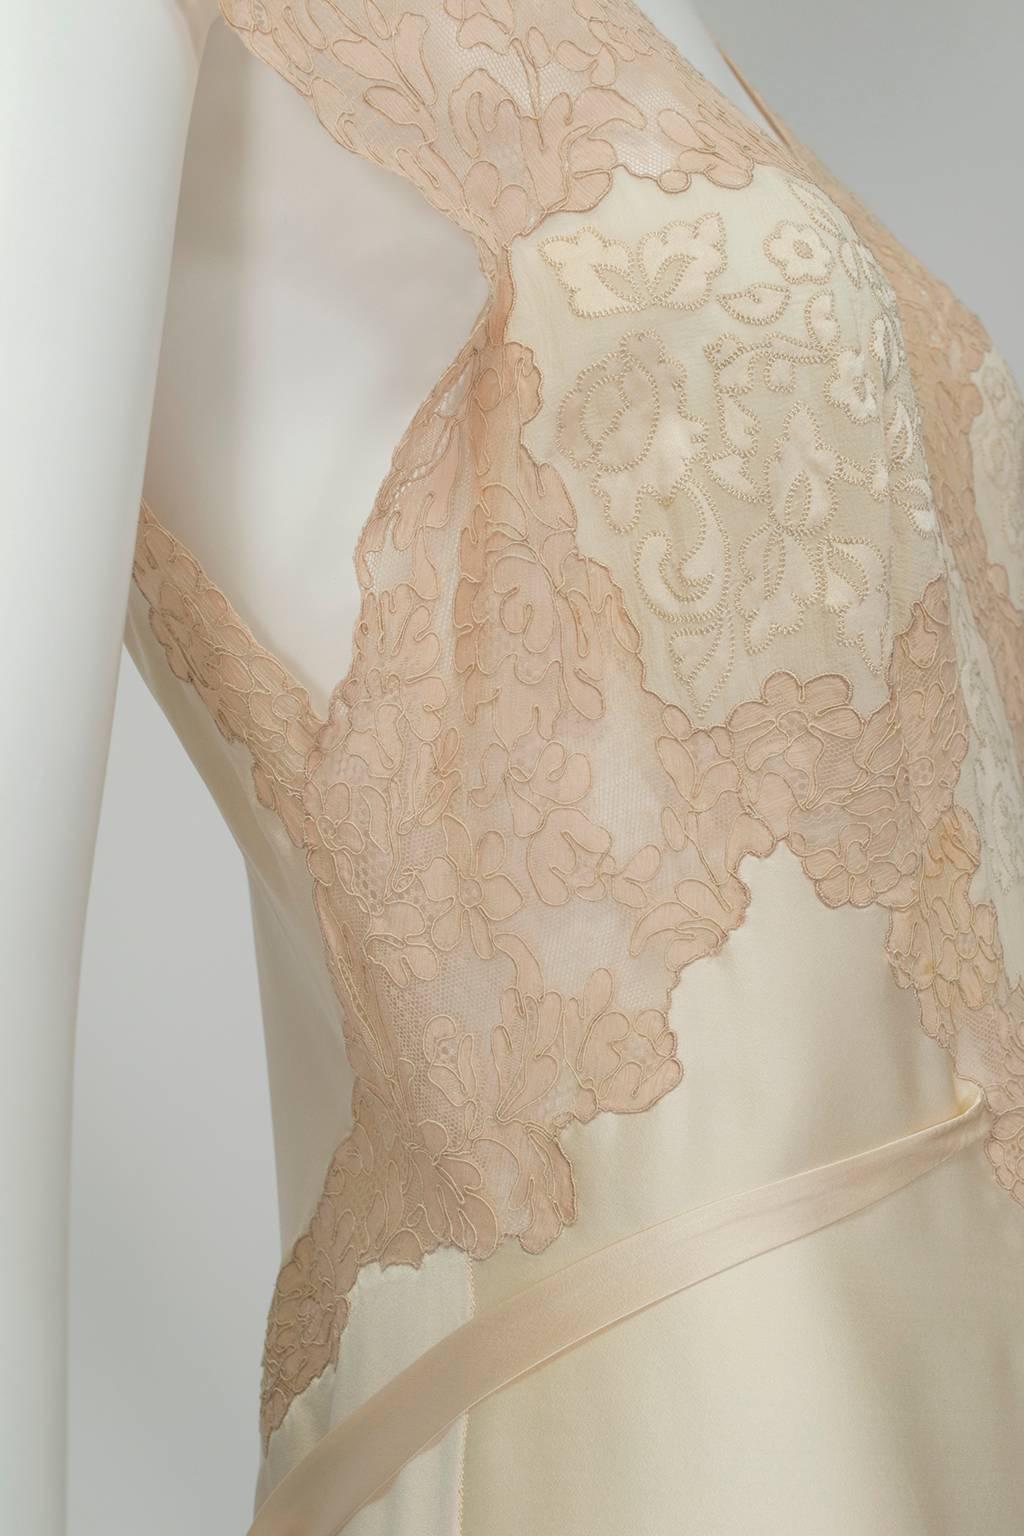 Women's Nude Hollywood Regency Charmeuse and Lace Peignoir Dressing Gown - Medium, 1930s